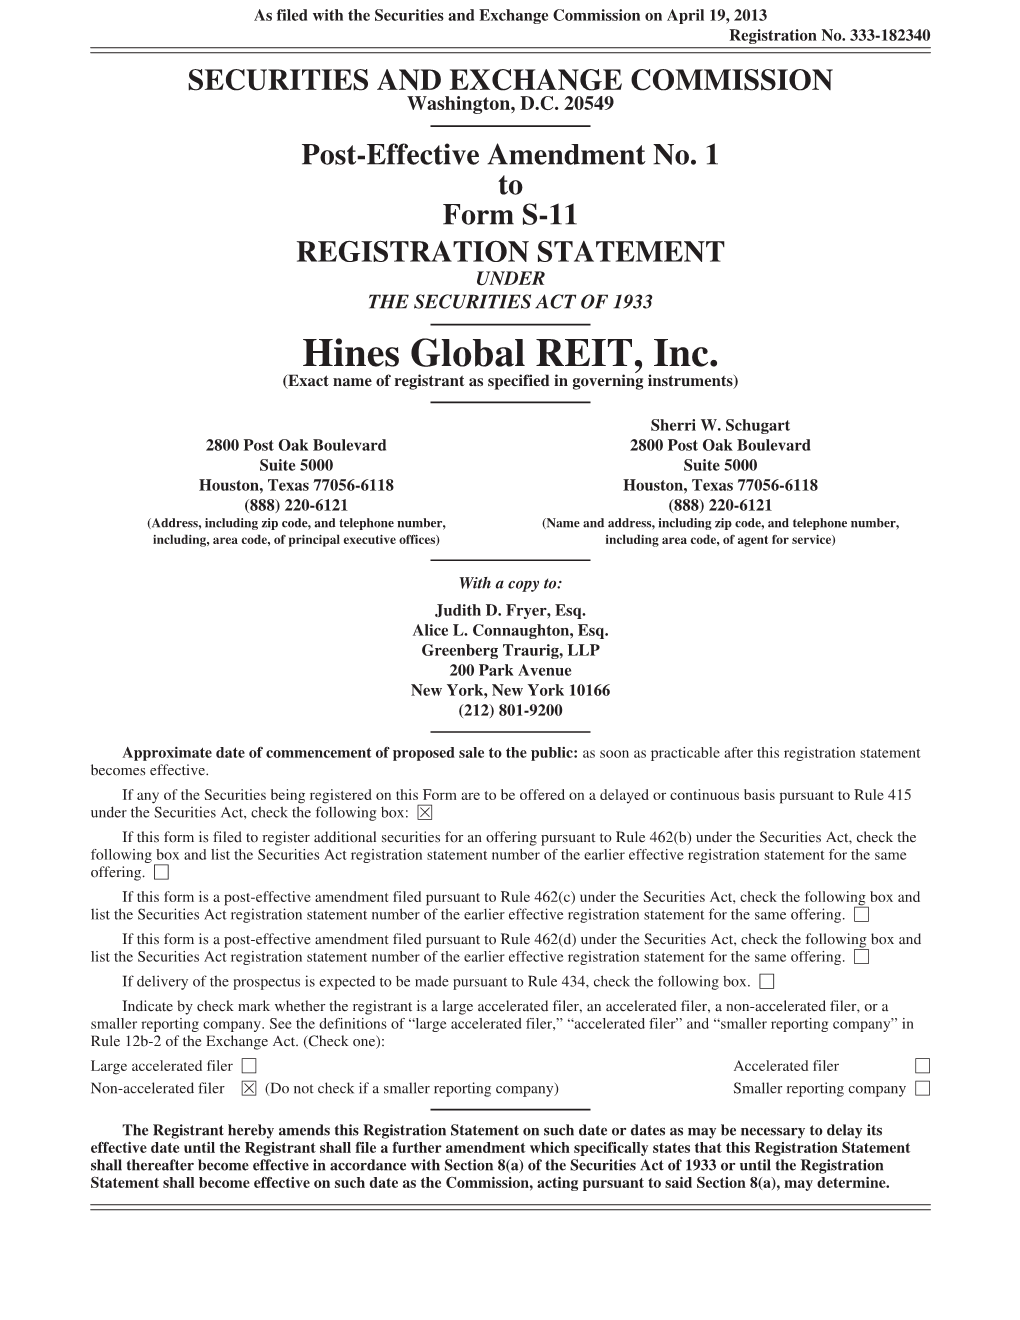 Hines Global REIT, Inc. (Exact Name of Registrant As Specified in Governing Instruments)